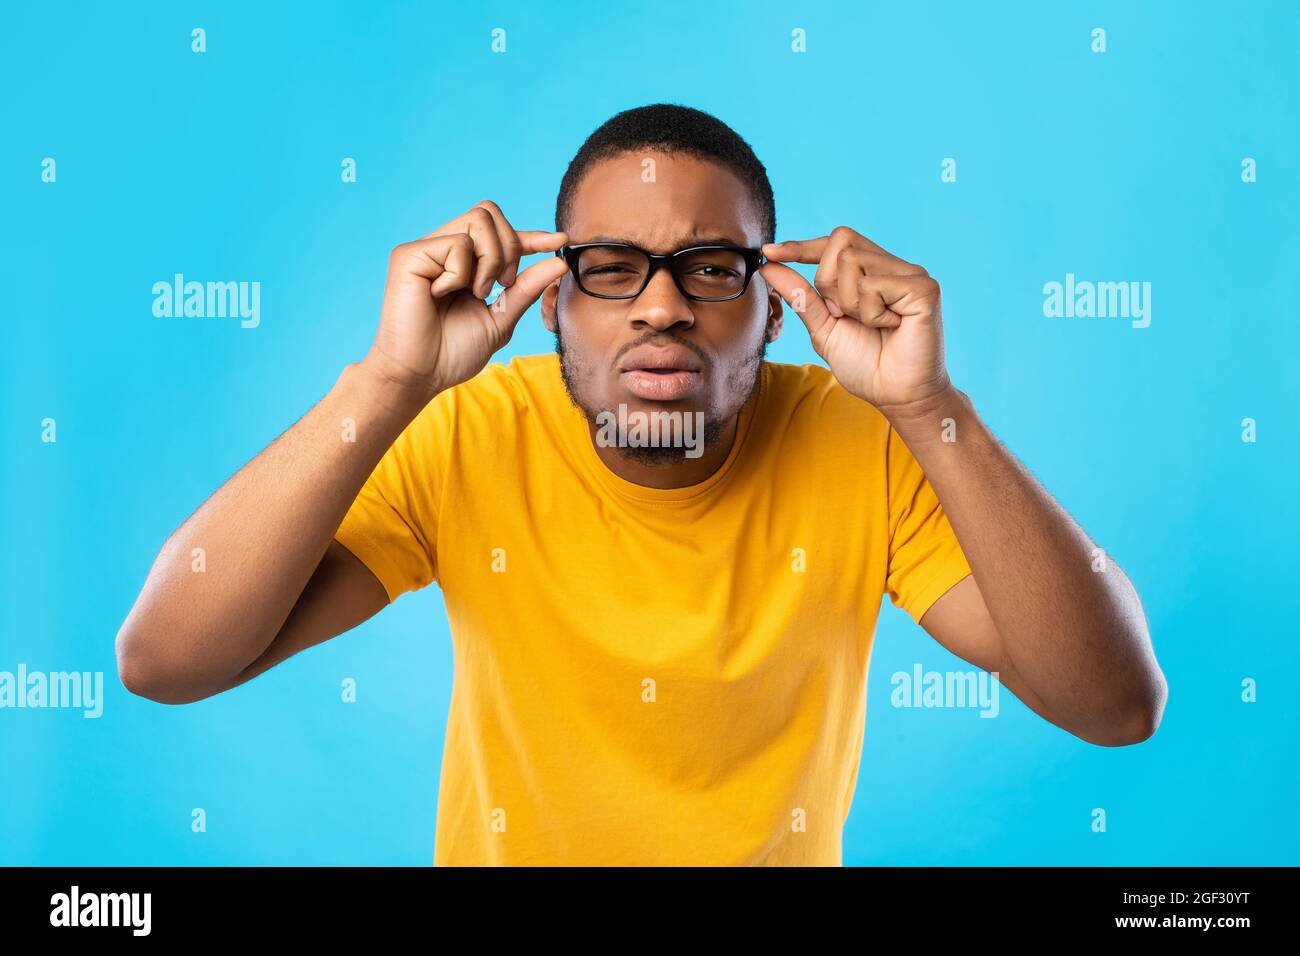 African American Guy With Poor Eyesight Squinting Eyes, Blue Background Stock Photo